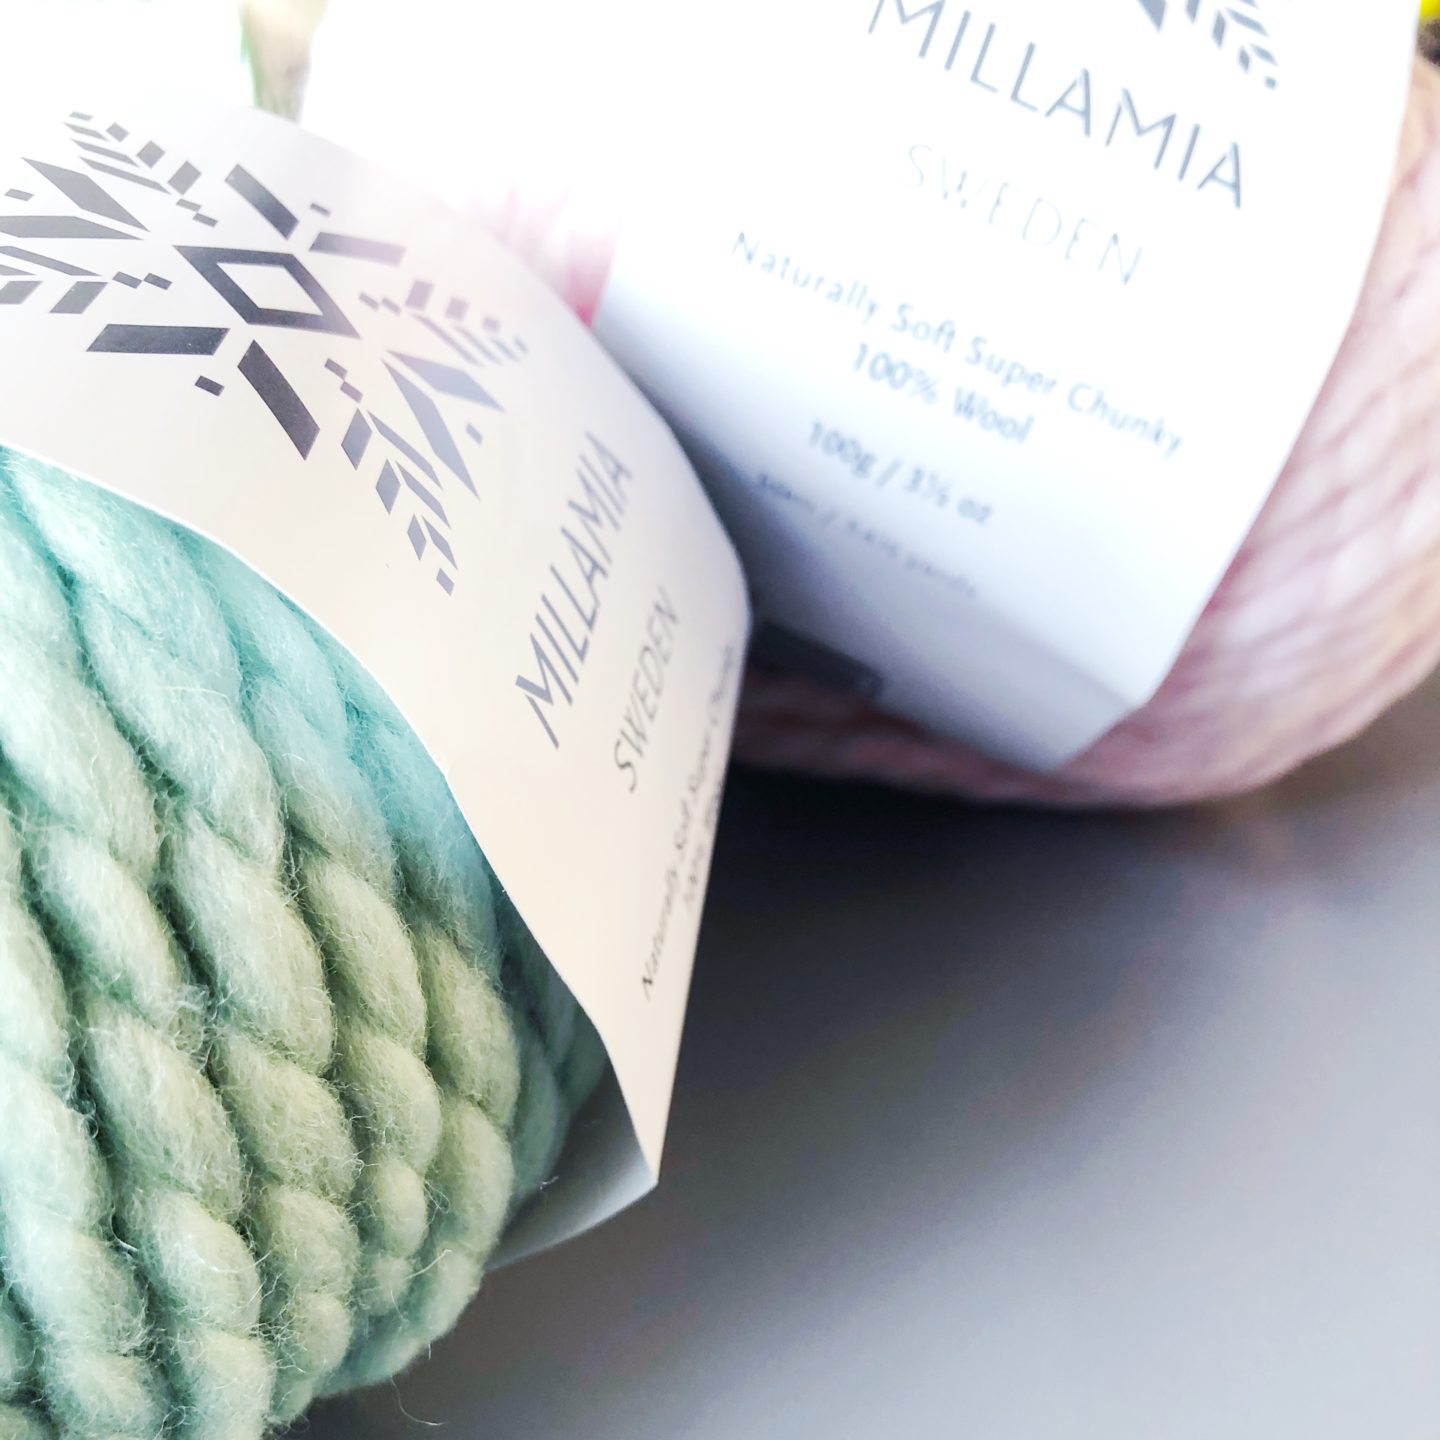 A close up picture of mint green and pale pink Millmia balls of wool